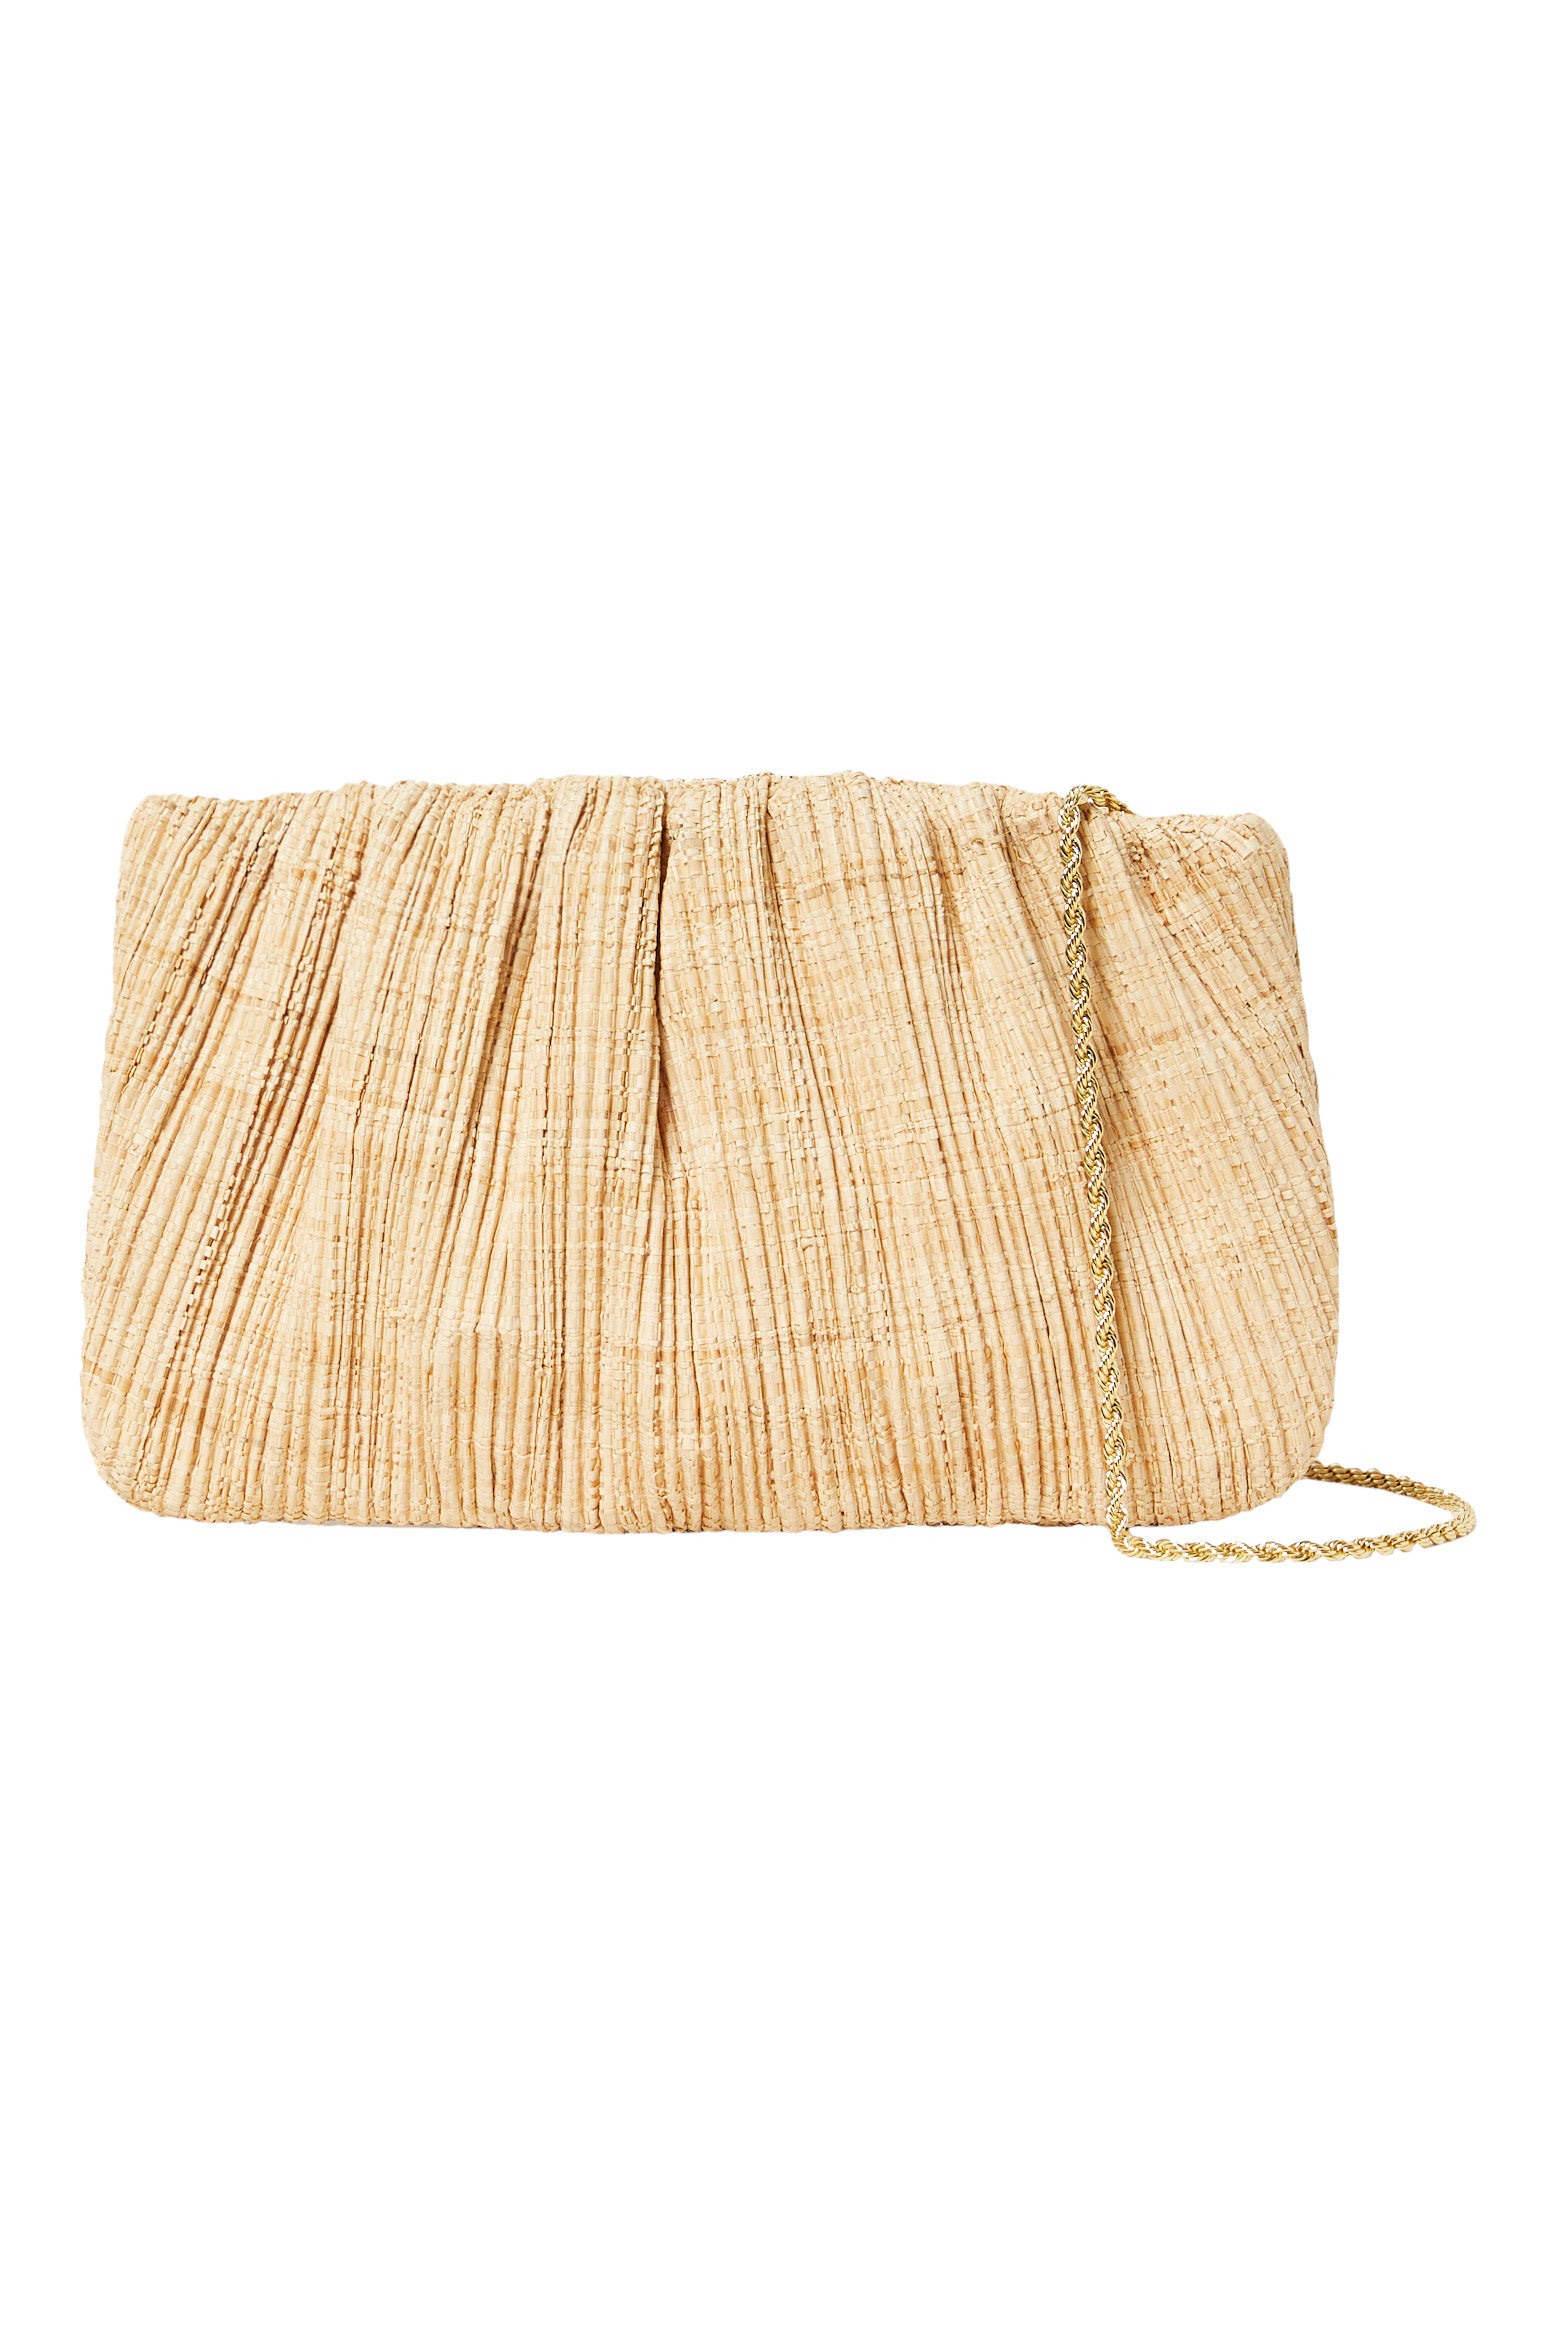 Loeffler Randall Brit Flat Pleated Pouch in Natural